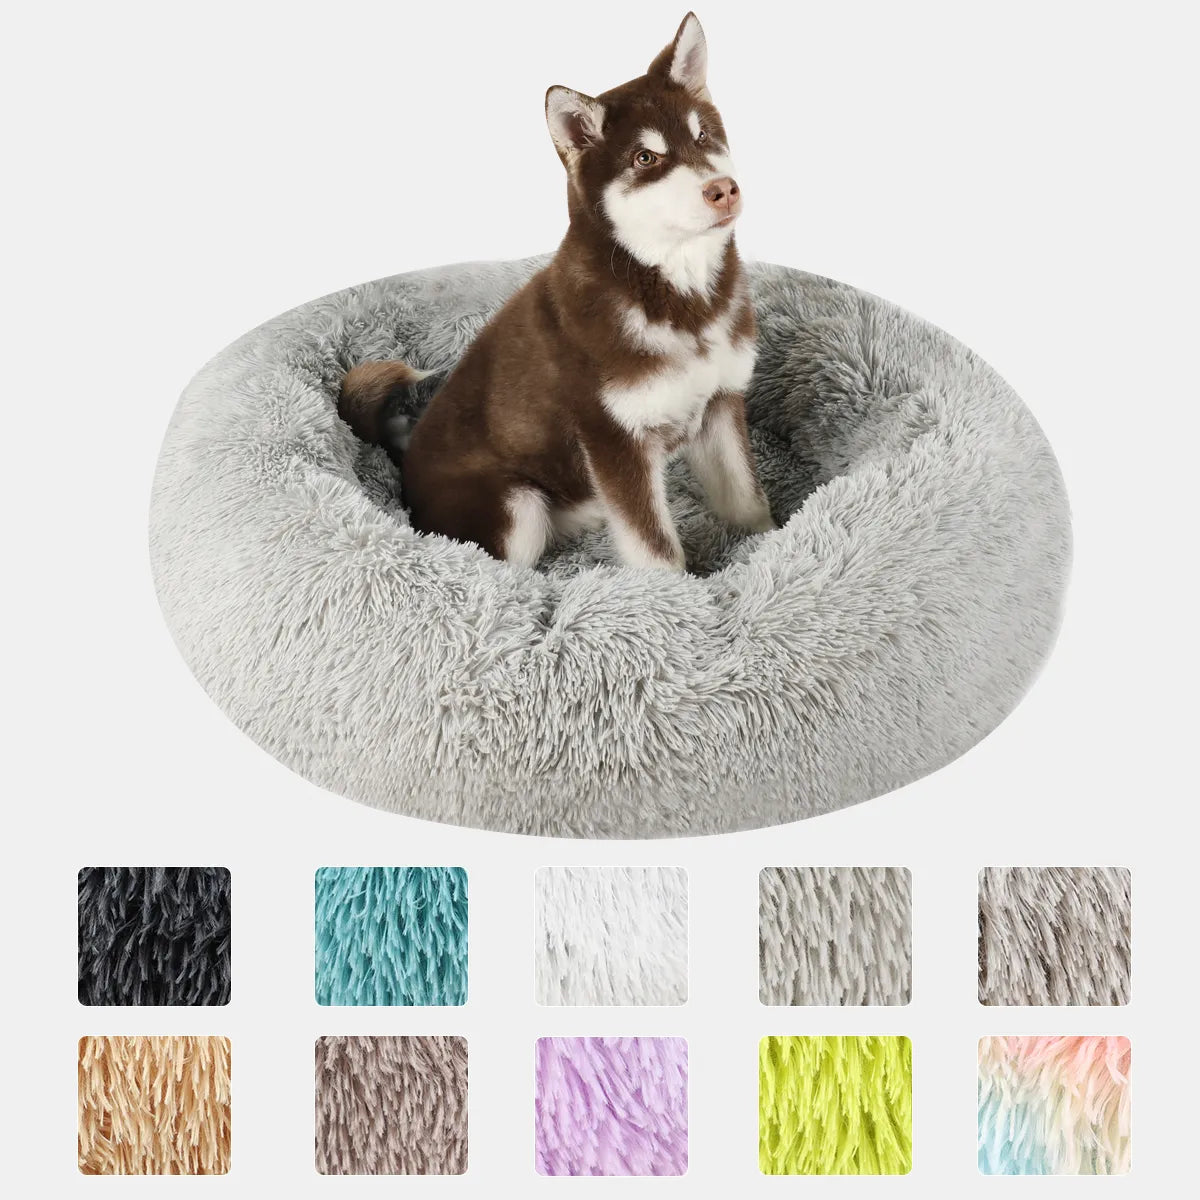 Snuggle Up for Sweet Dreams: The Cozy, Washable Round Bed Your Pet Will Adore